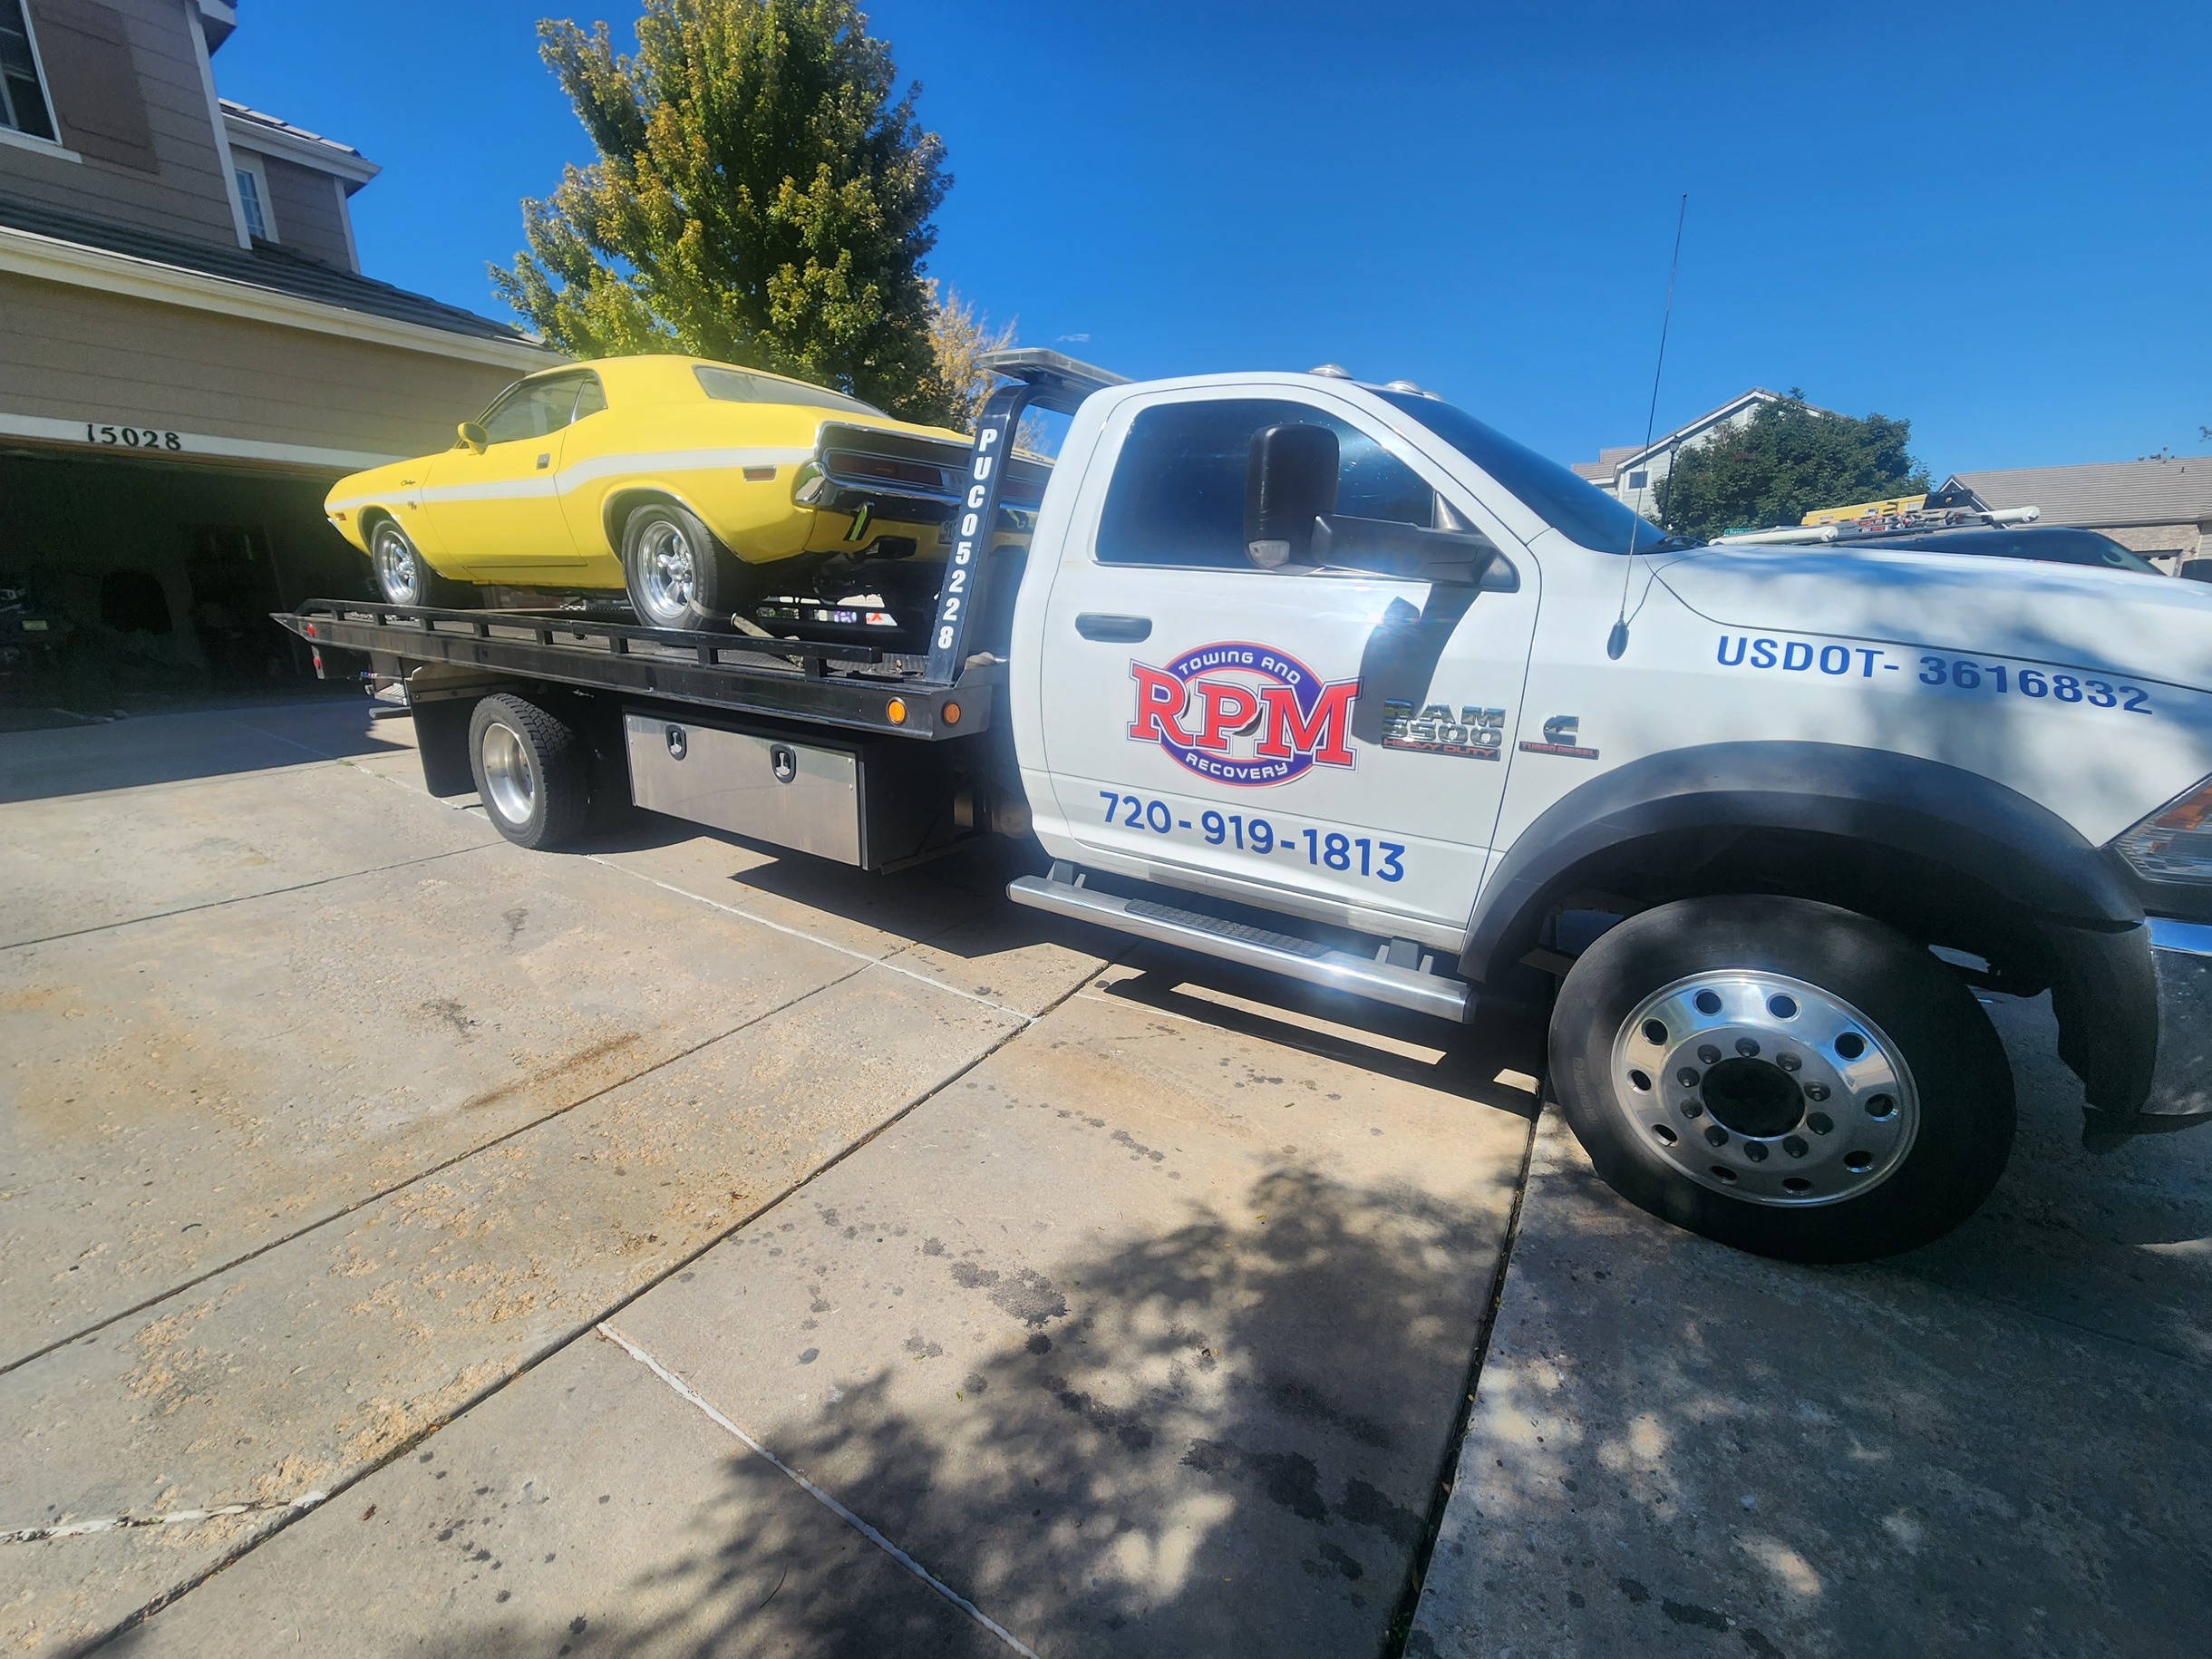 this image shows towing service in Englewood, CO